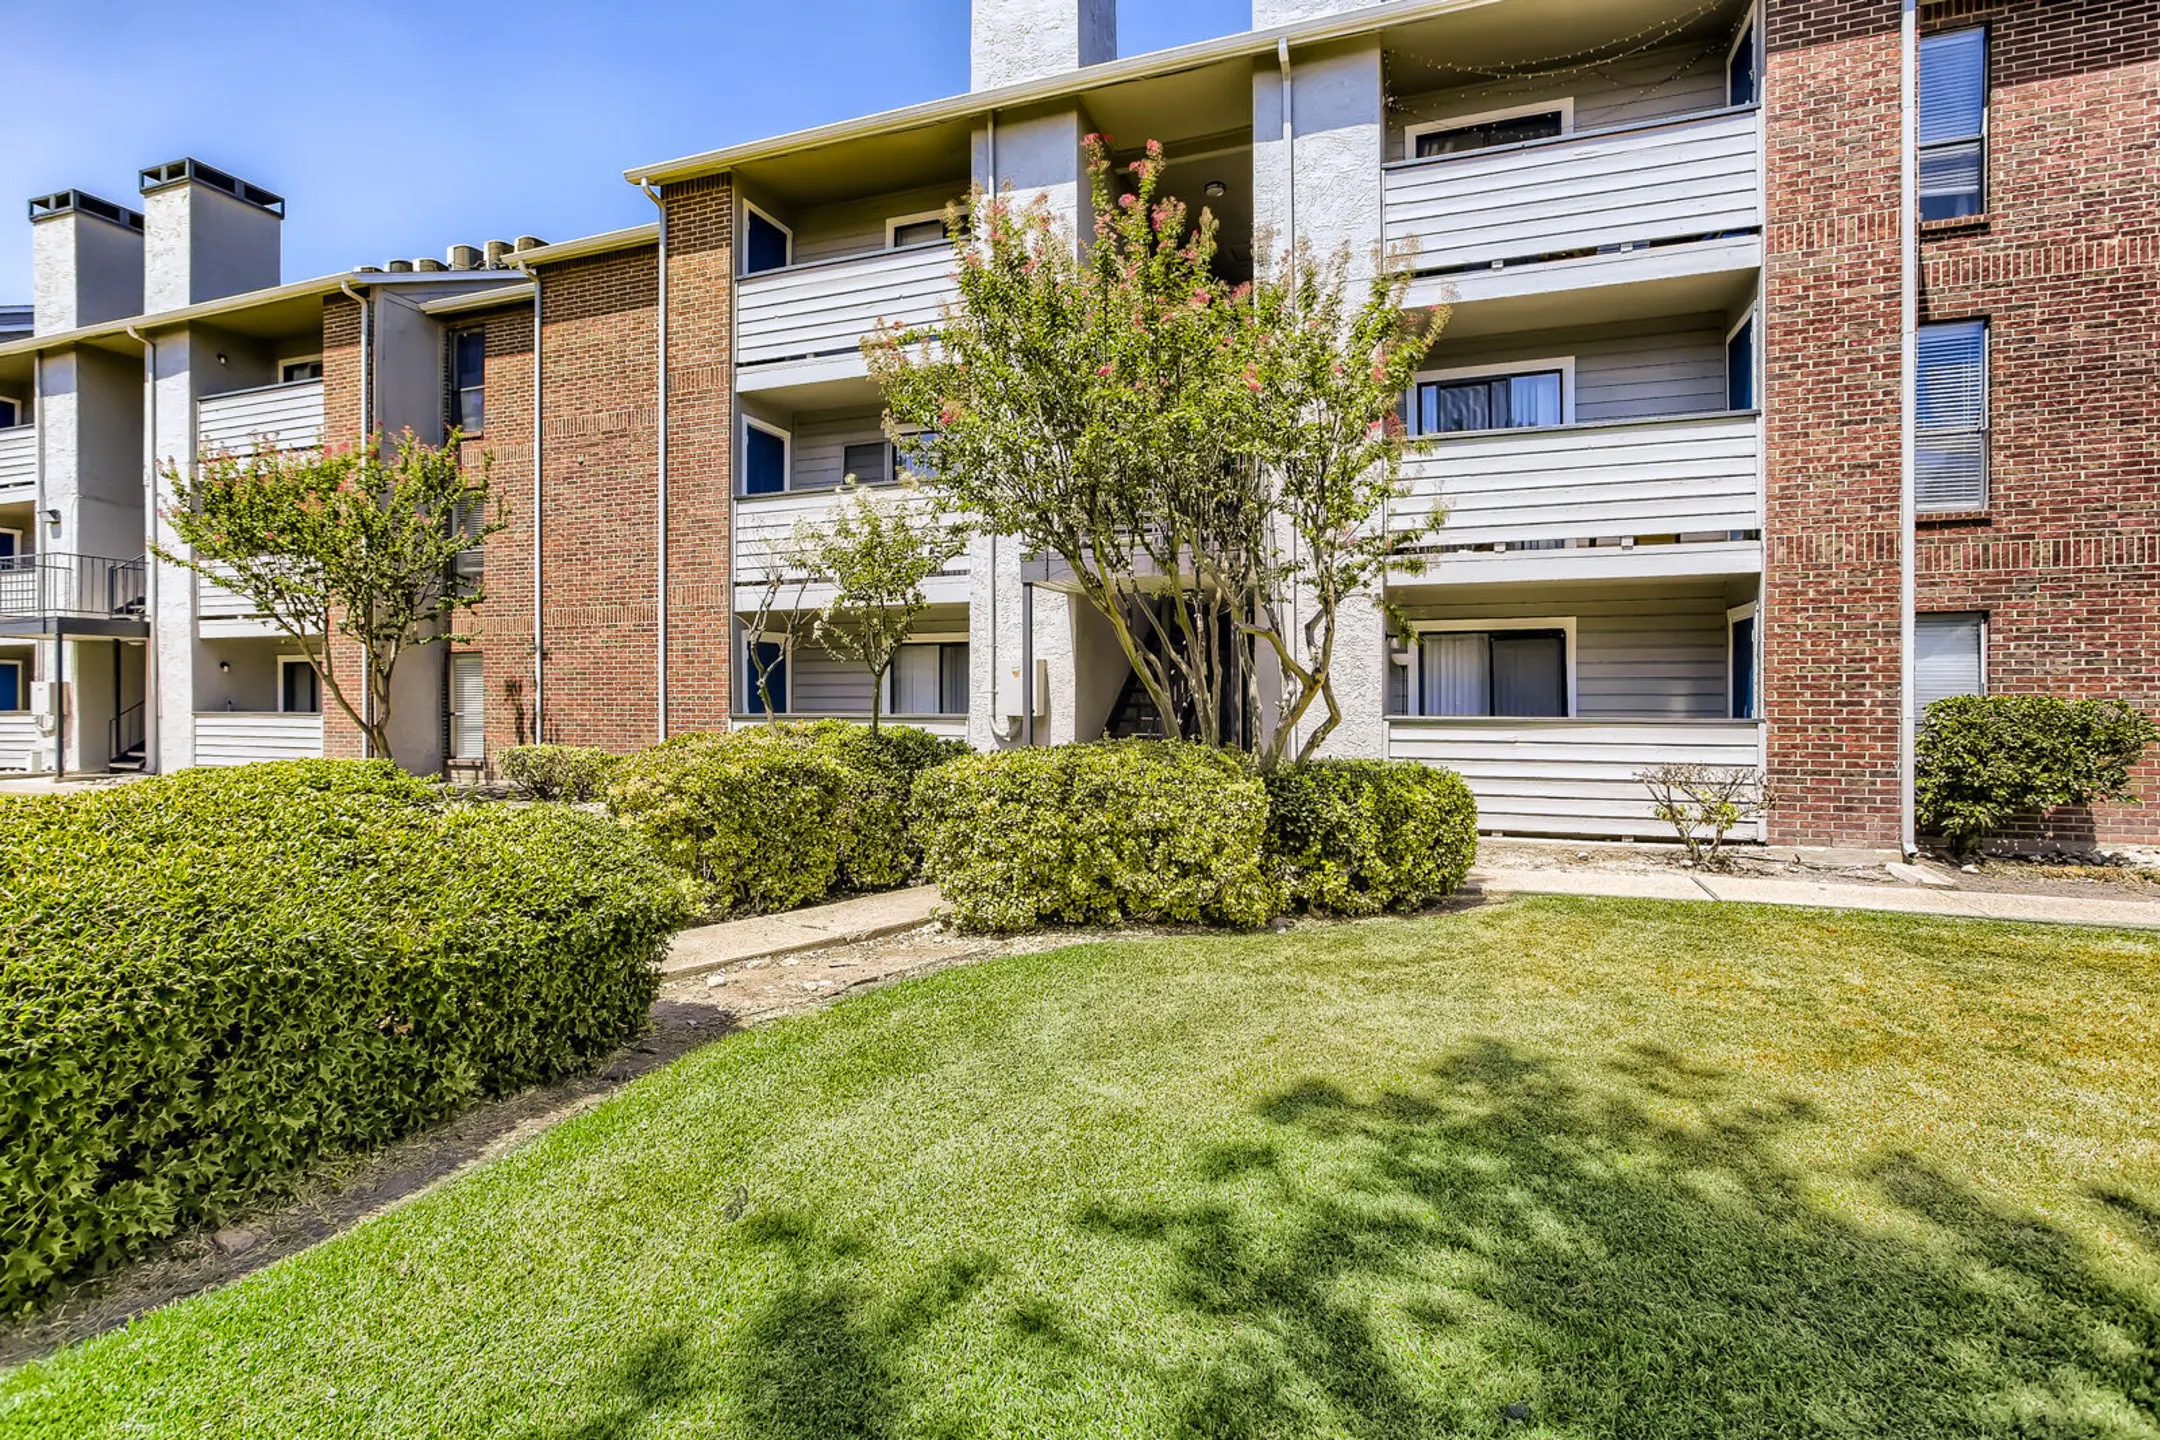 Claro Court 10950 Woodmeadow Pkwy Dallas TX Apartments for Rent